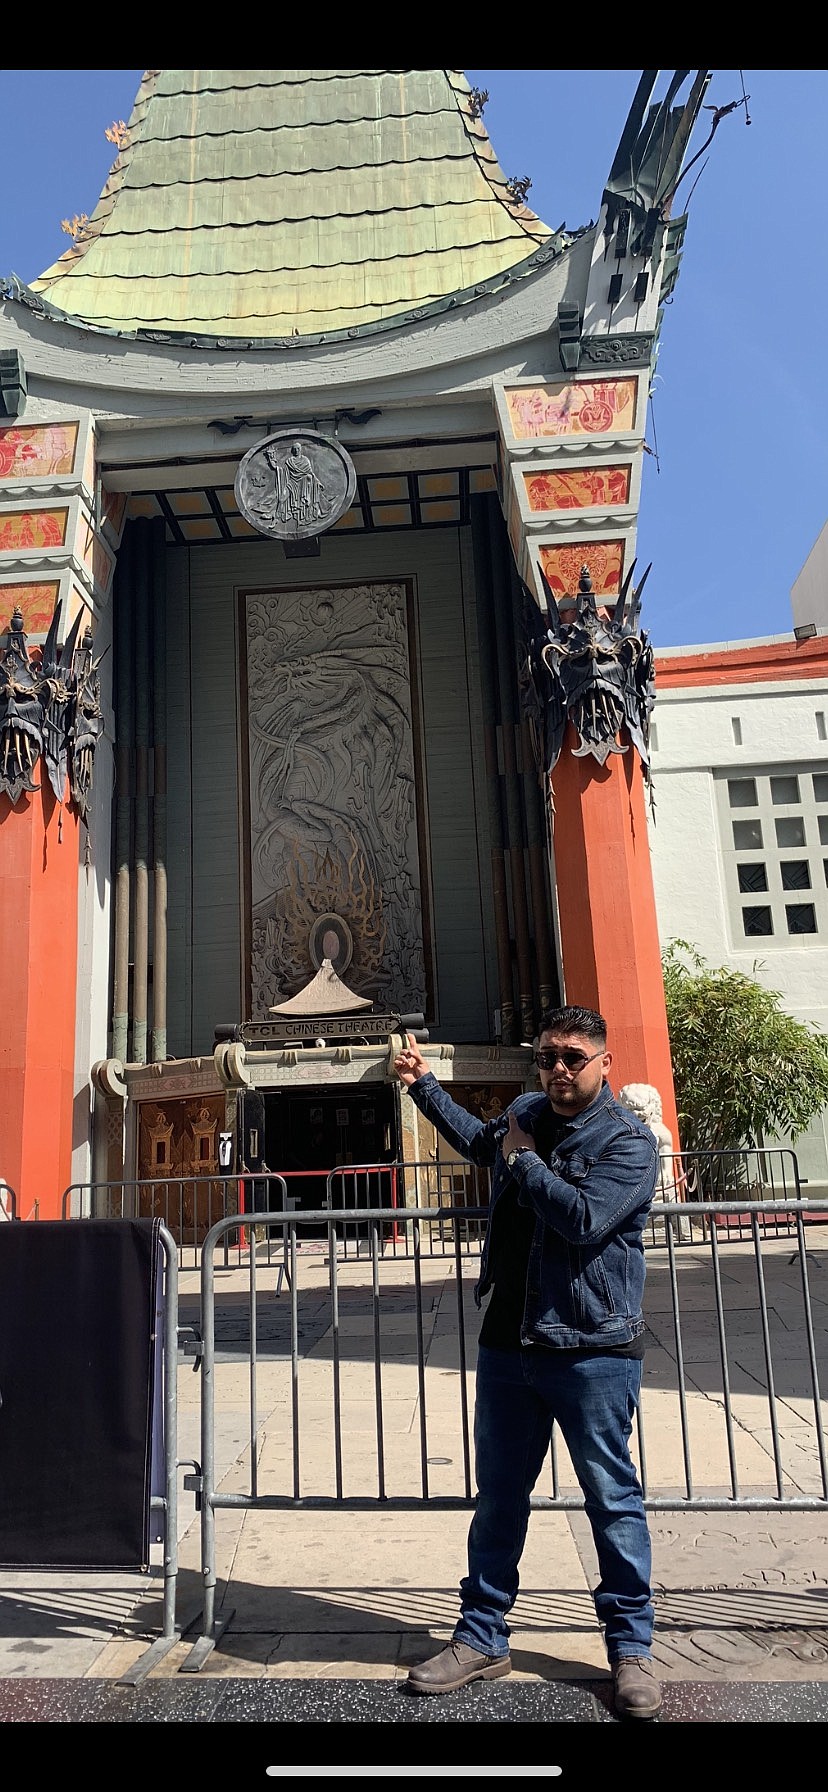 Dino Gonzales points up to the famous TCL Chinese Theater in Los Angeles, California, after visiting recently with his wife on a mini vacation.